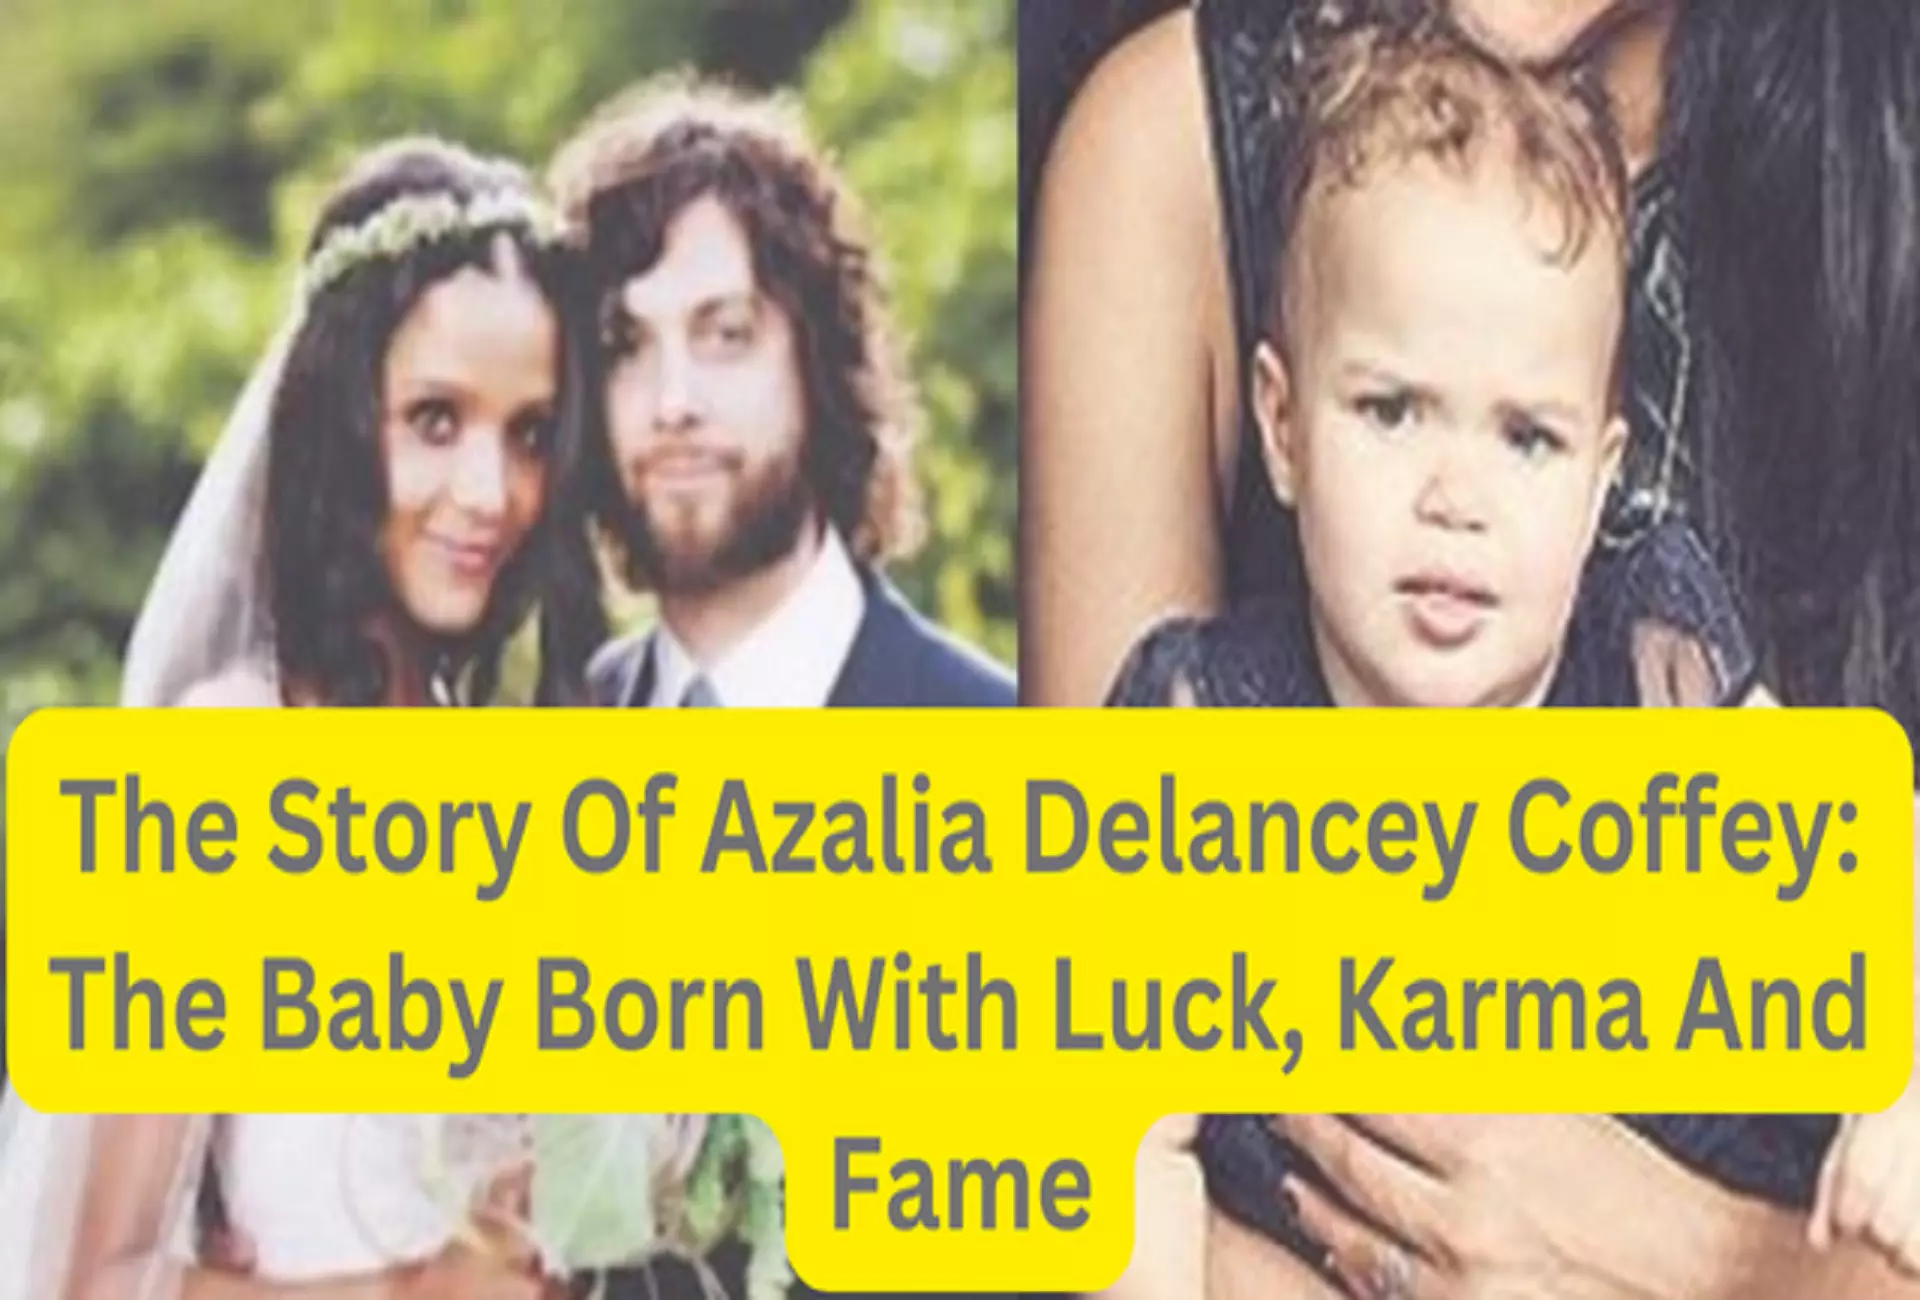 The Story Of Azalia Delancey Coffey: The Baby Born With Amazing Luck, Karma And Fame